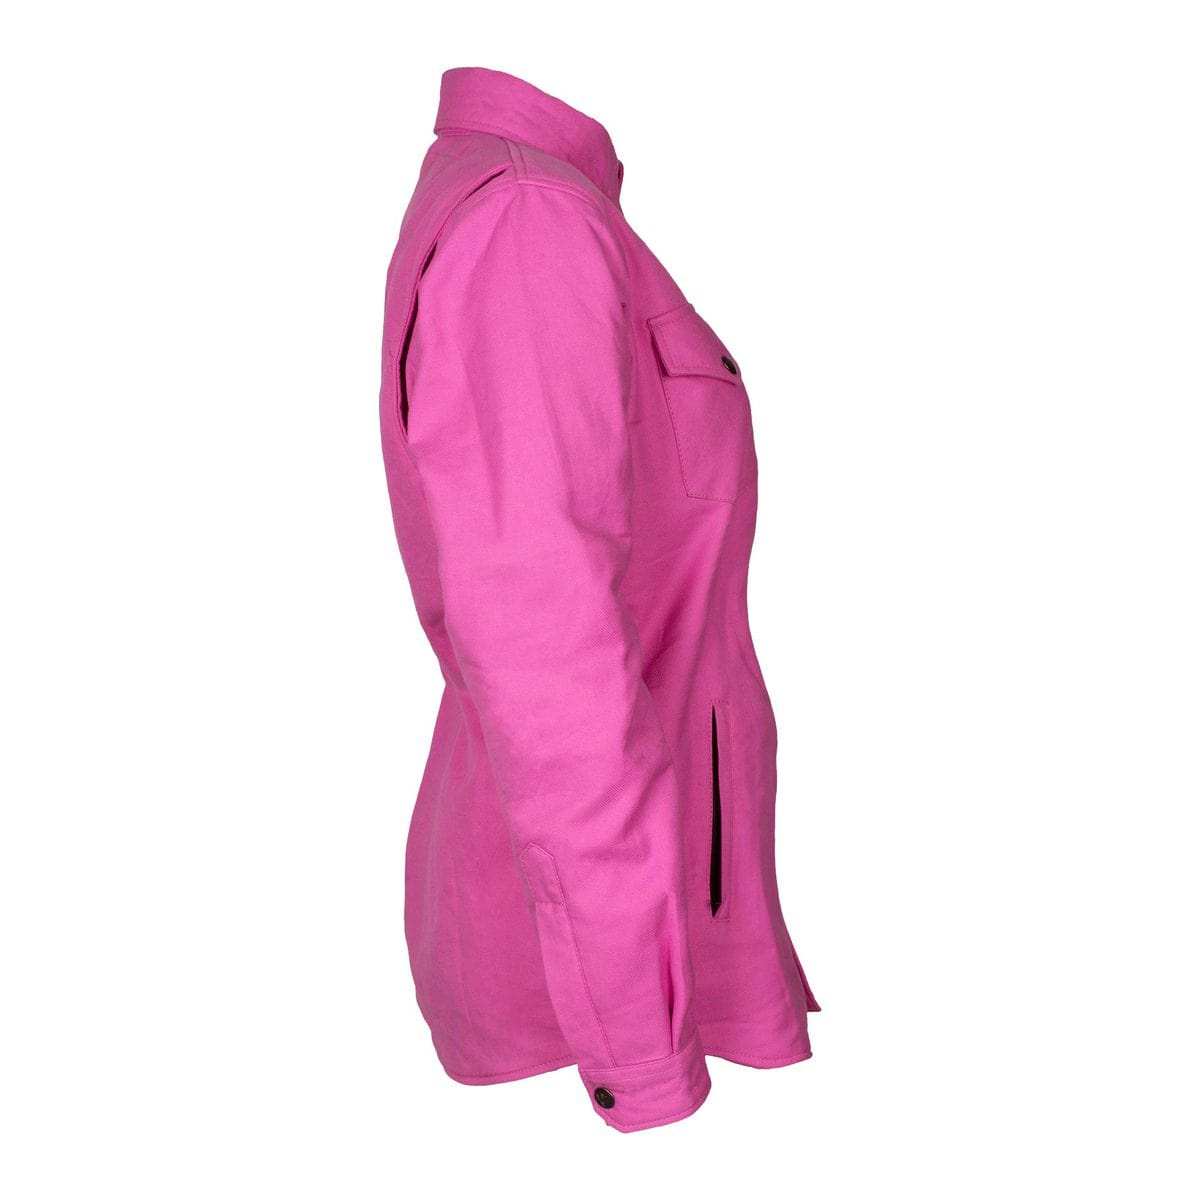 Protective Flannel Shirt with Pads for Women - Pink Solid